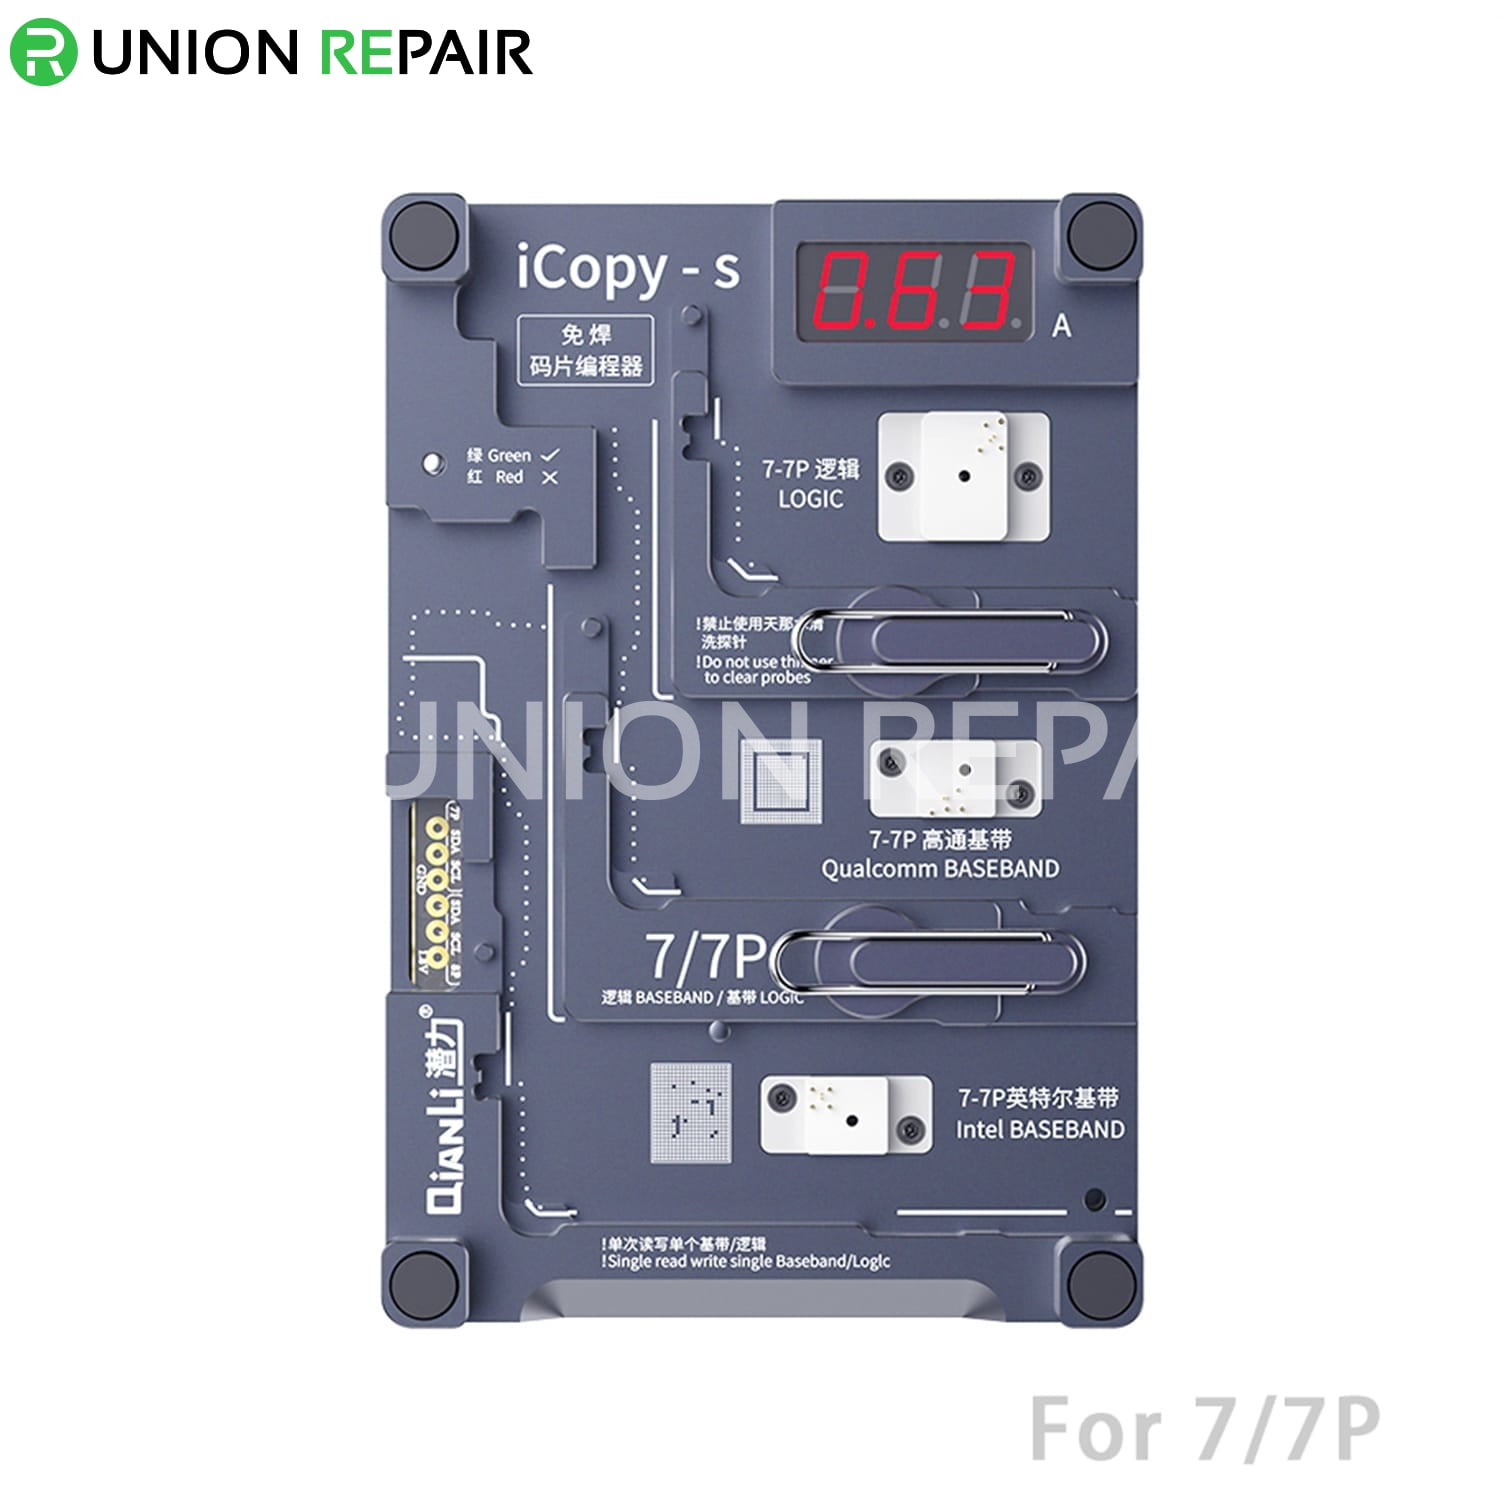 TOOLPLUS QIANLI ICOPY-S DOUBLE - SIDED 4IN1 LOGIC BASEBAND EEPROM CHIP NON-REMOVAL FOR IPHONE 6G 6S 6+ 6S+